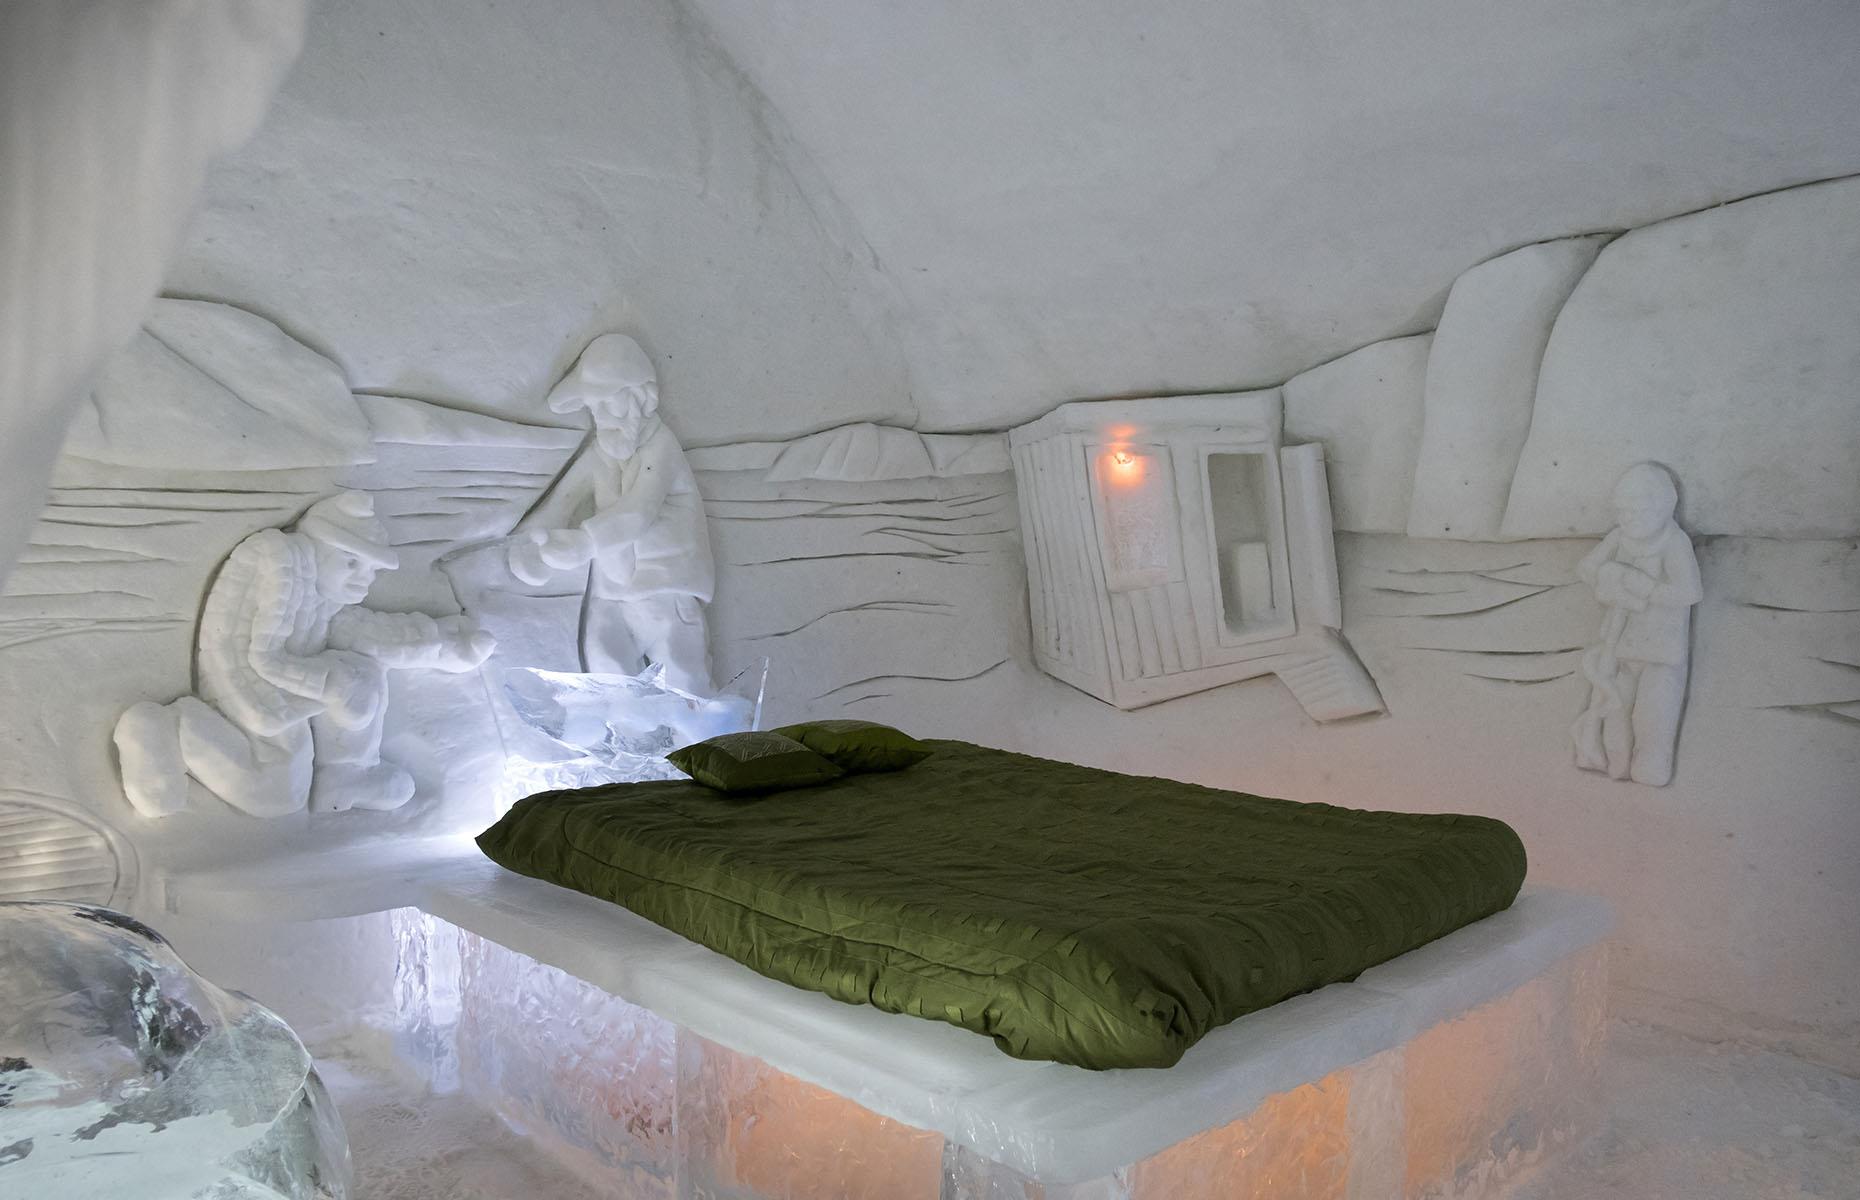 <p>Travelling in winter? You can seek refuge in the spectacular <a href="https://www.valcartier.com/en/lodging/hotel-de-glace-ice-hotel/">Hotel de Glace</a>, a luxurious hotel made entirely of ice, just north of Québec City. It takes 60 people 45 days to build and only lasts from January until March.</p>  <p>The next day, refuel at Trois-Pistoles, where you can pick up freshly made breads, pastries and cheese at locally-renowned Fromagerie des Basques.</p>